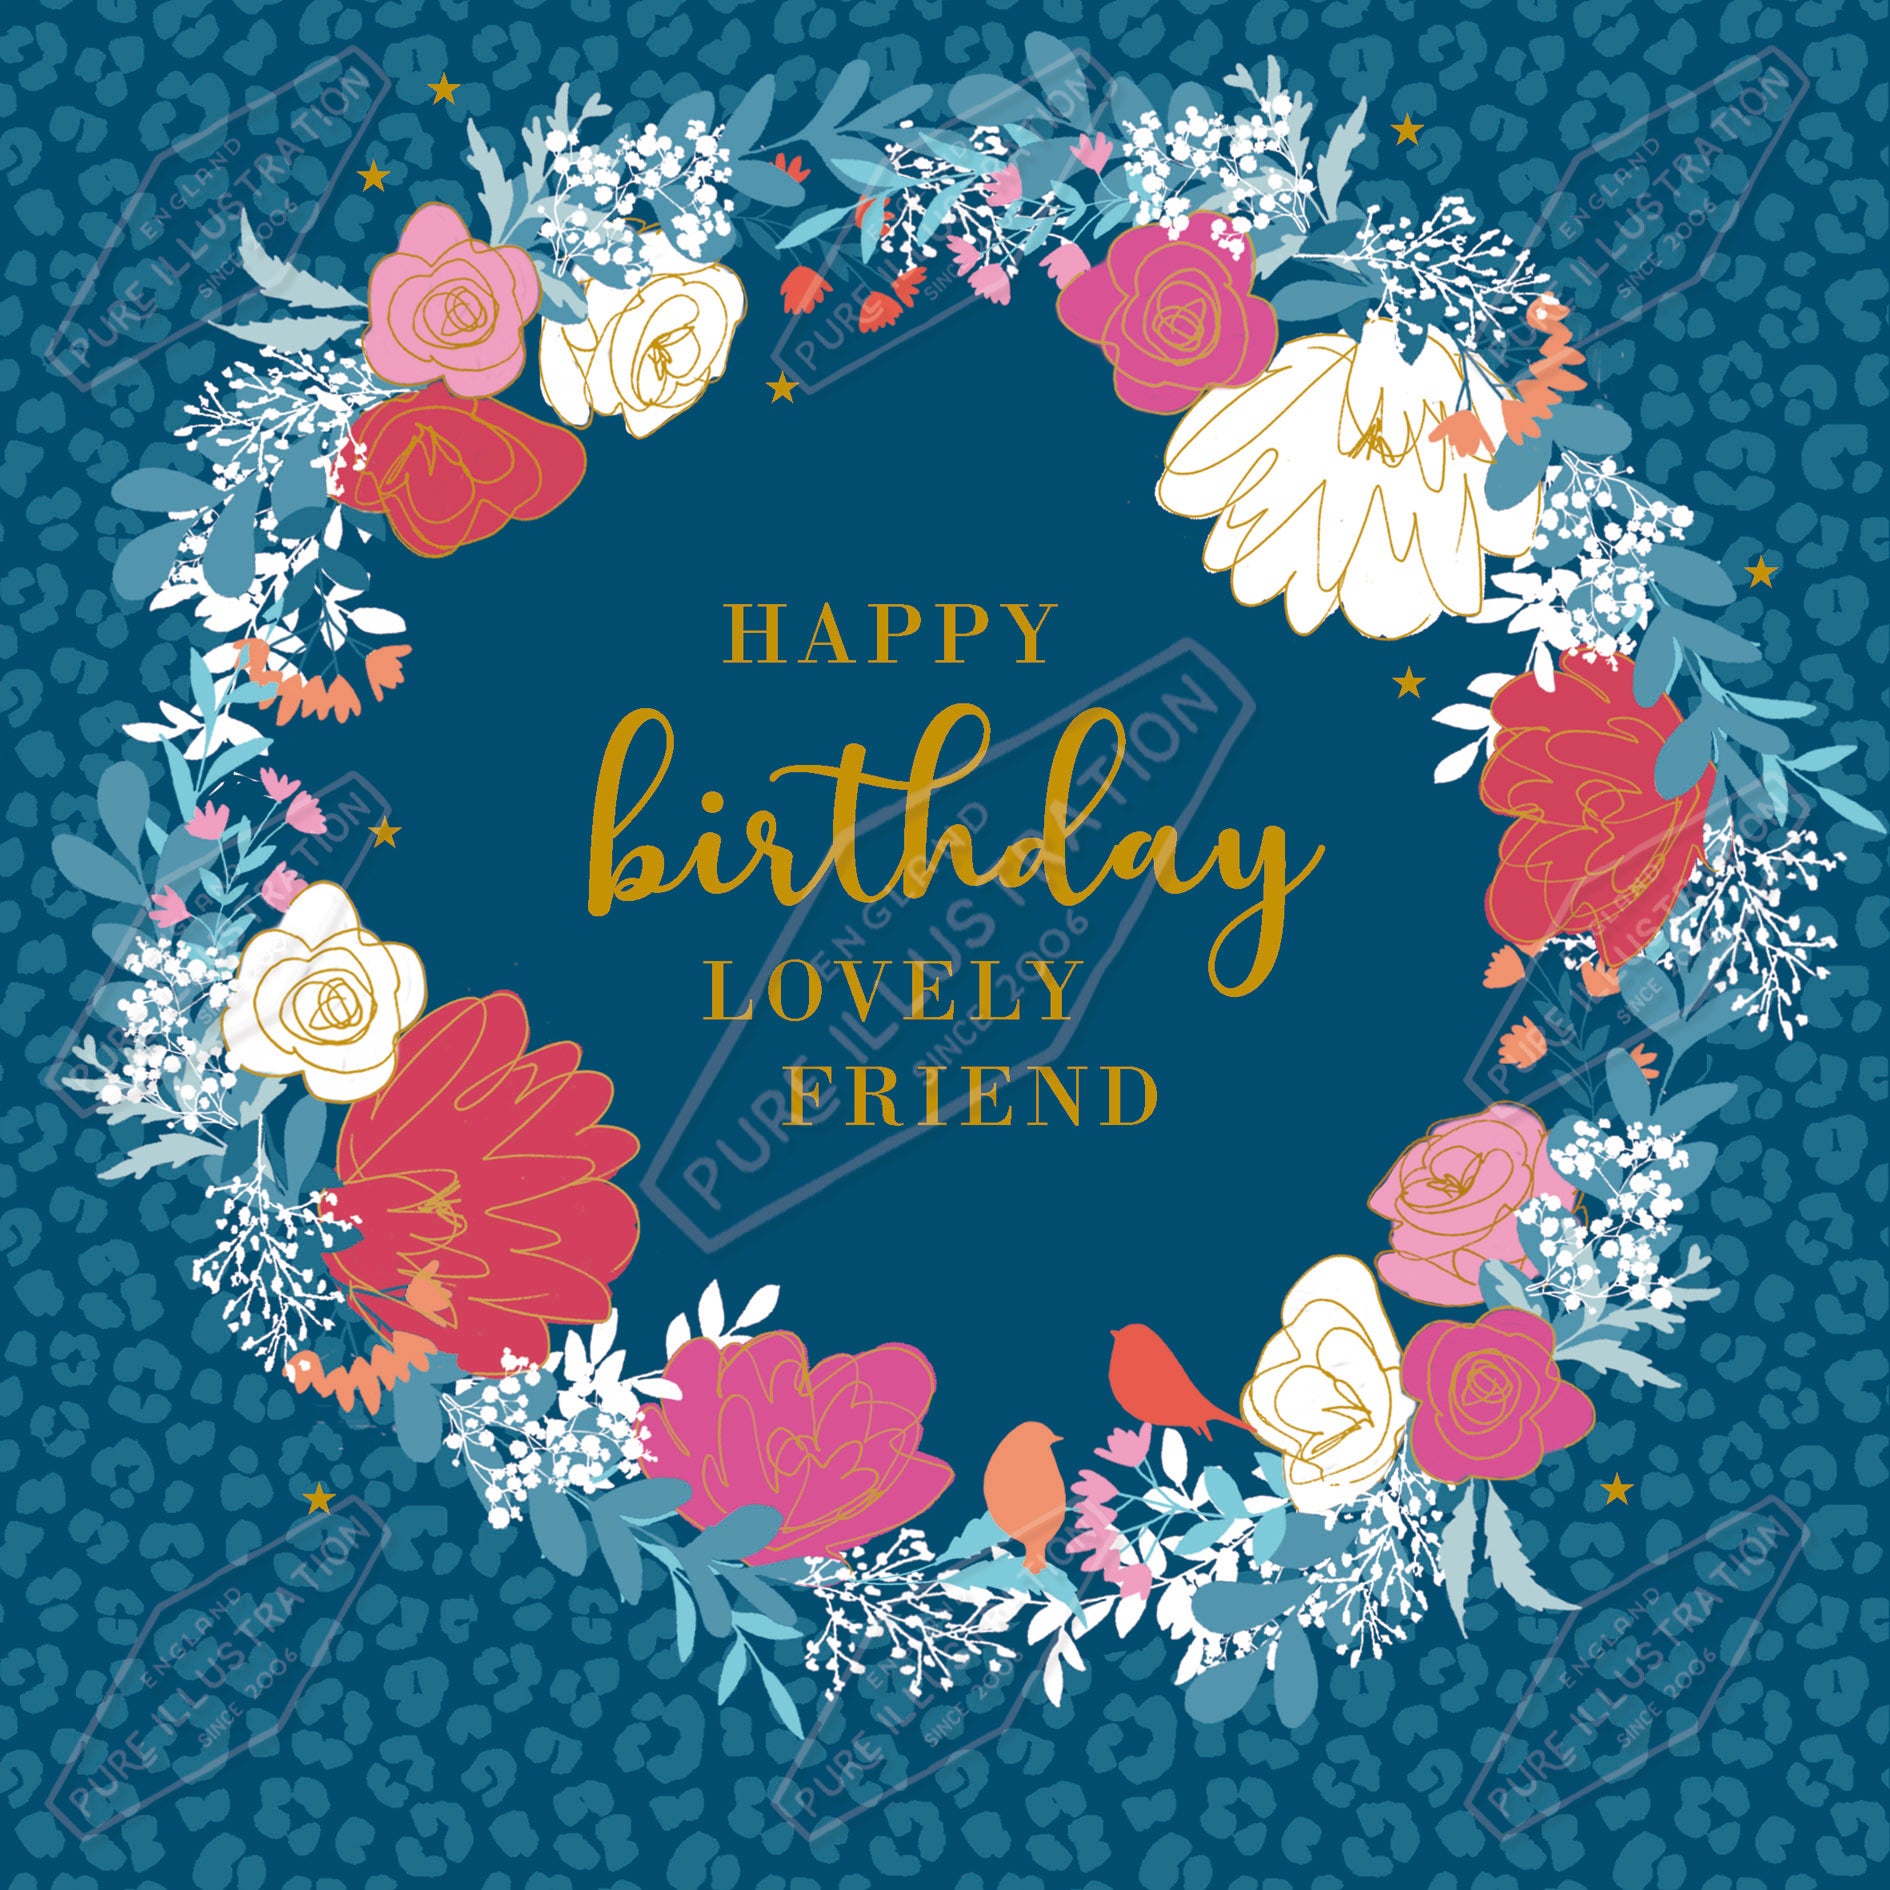 00035466CMI - Caitlin Miller is represented by Pure Art Licensing Agency - Birthday Greeting Card Design